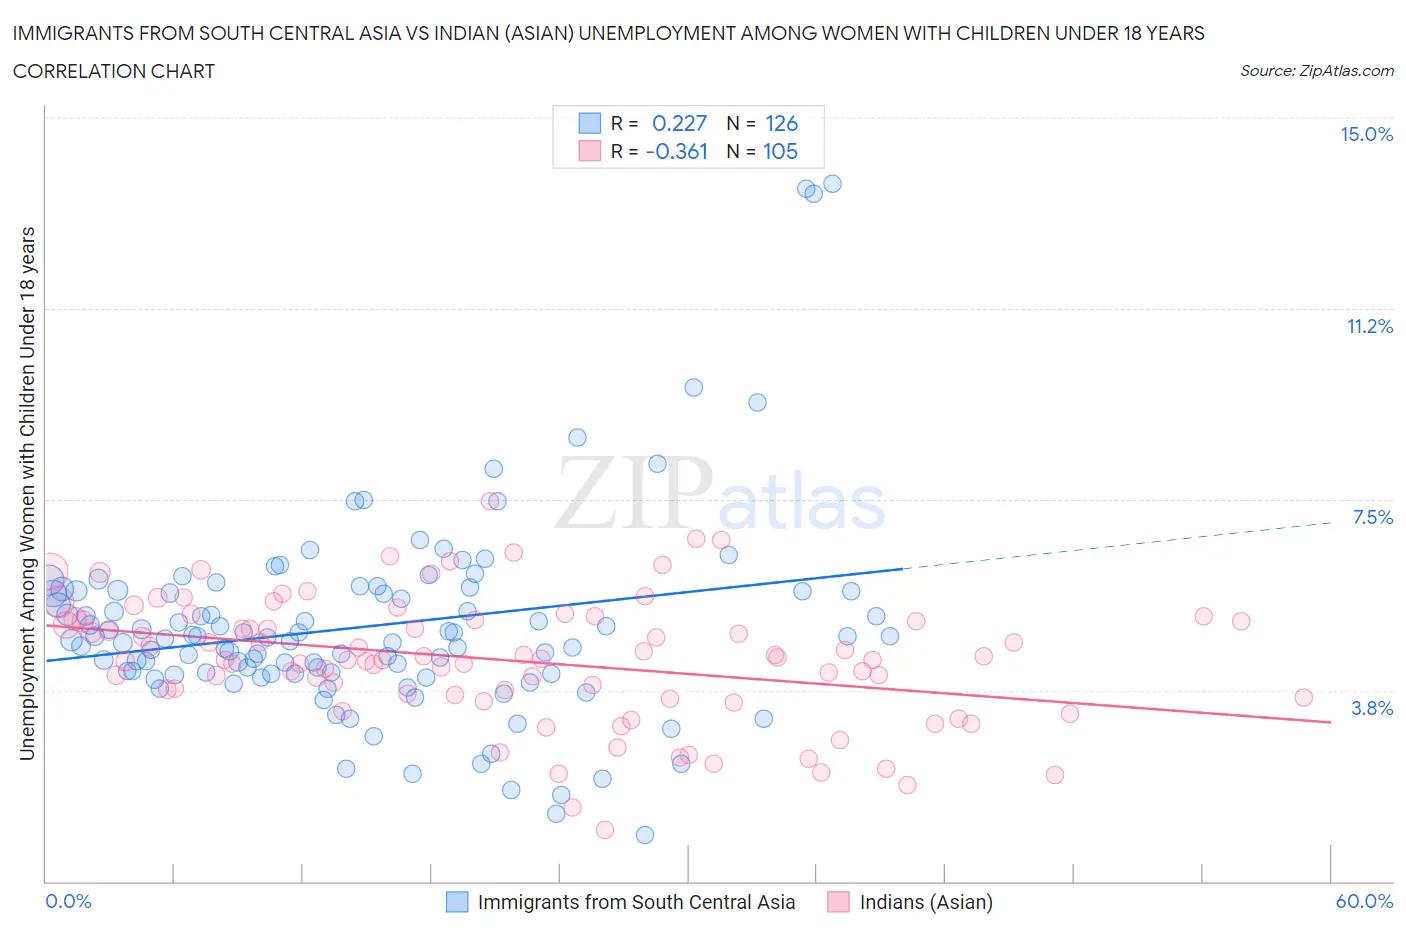 Immigrants from South Central Asia vs Indian (Asian) Unemployment Among Women with Children Under 18 years